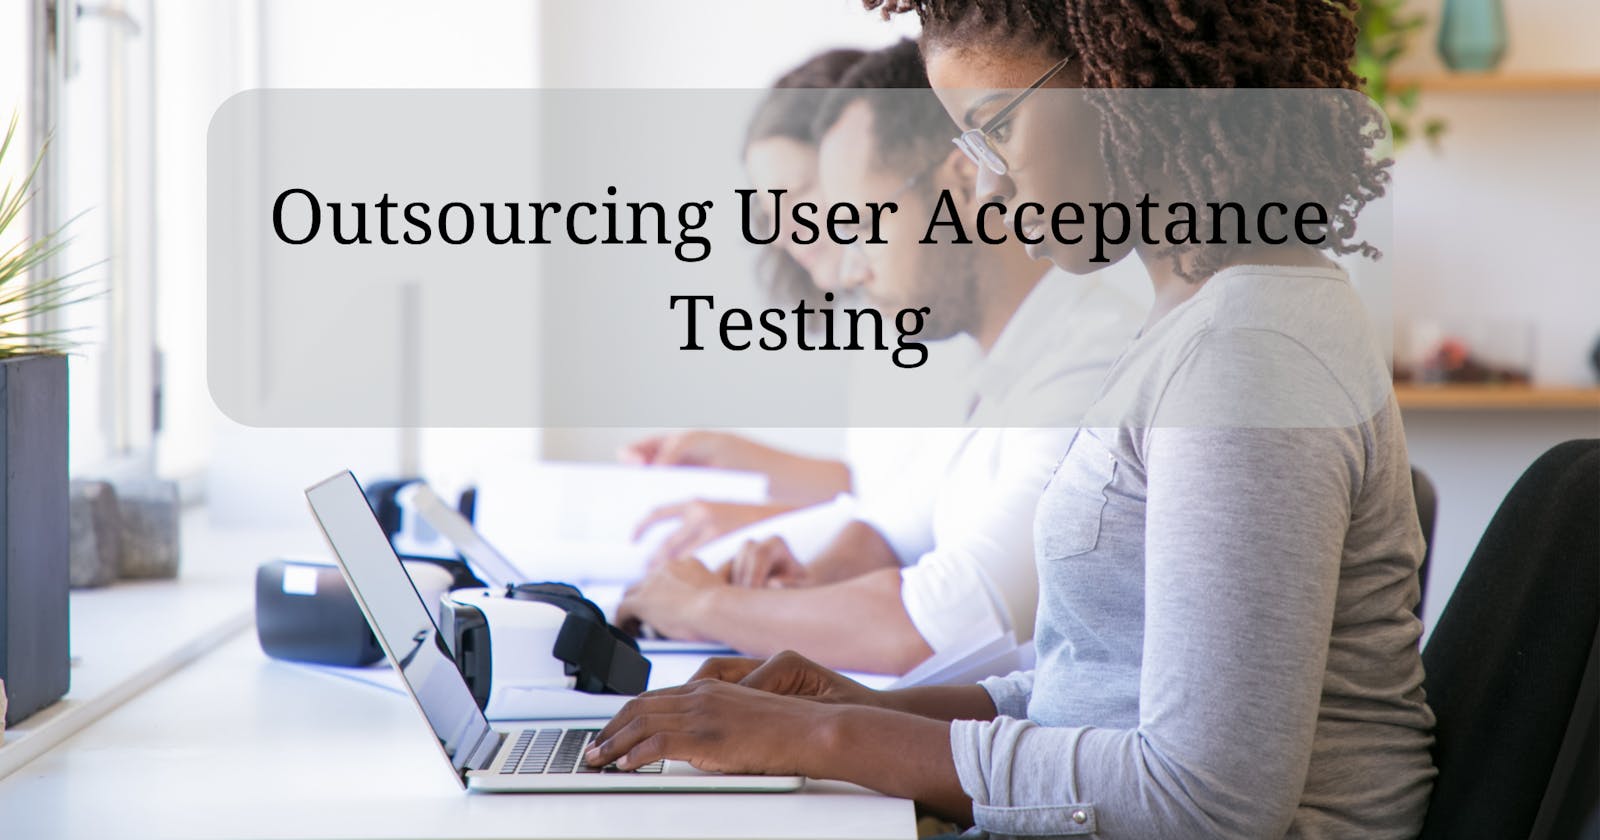 Outsourcing User Acceptance Testing